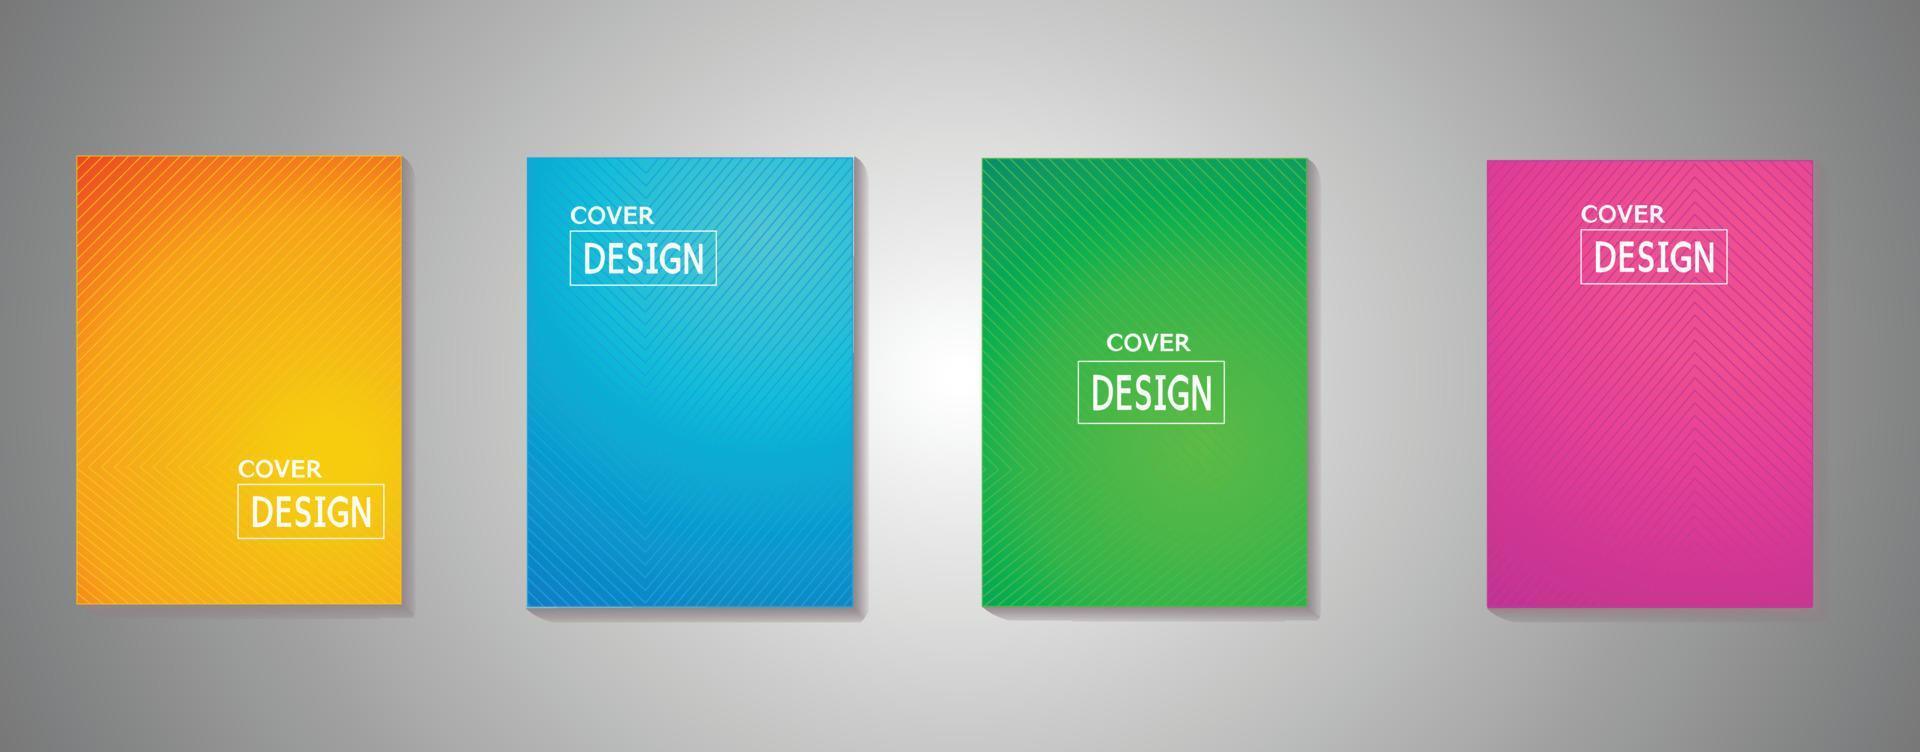 Book Cover set gradient style vector art.